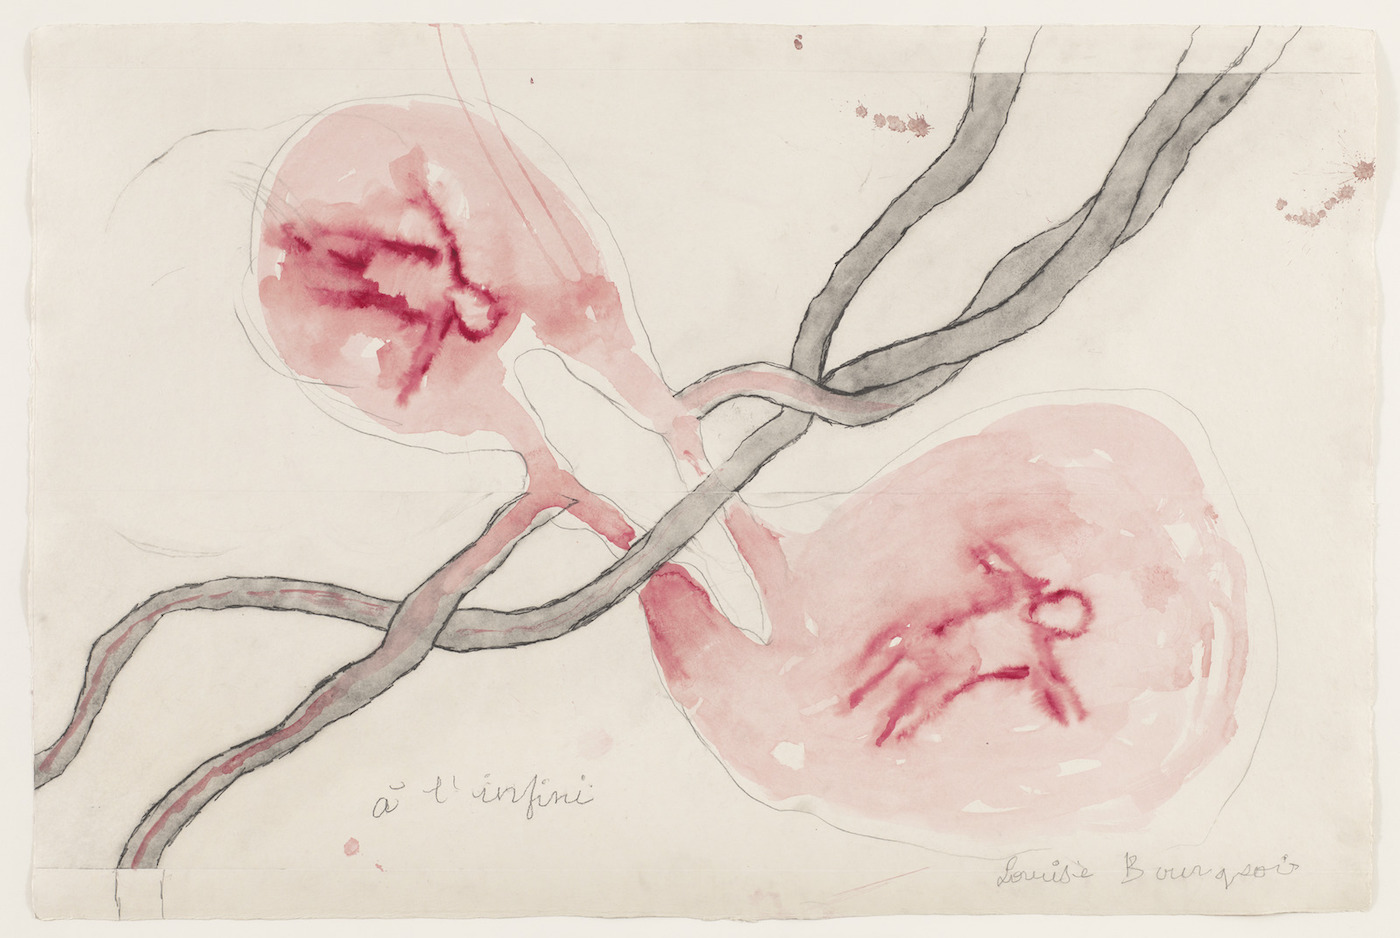 Etching with watercolor and gouache. Two red human figures painted in simple, blurry lines inside round light red forms connected by two tubes, which also connect to gray twisting tubes.